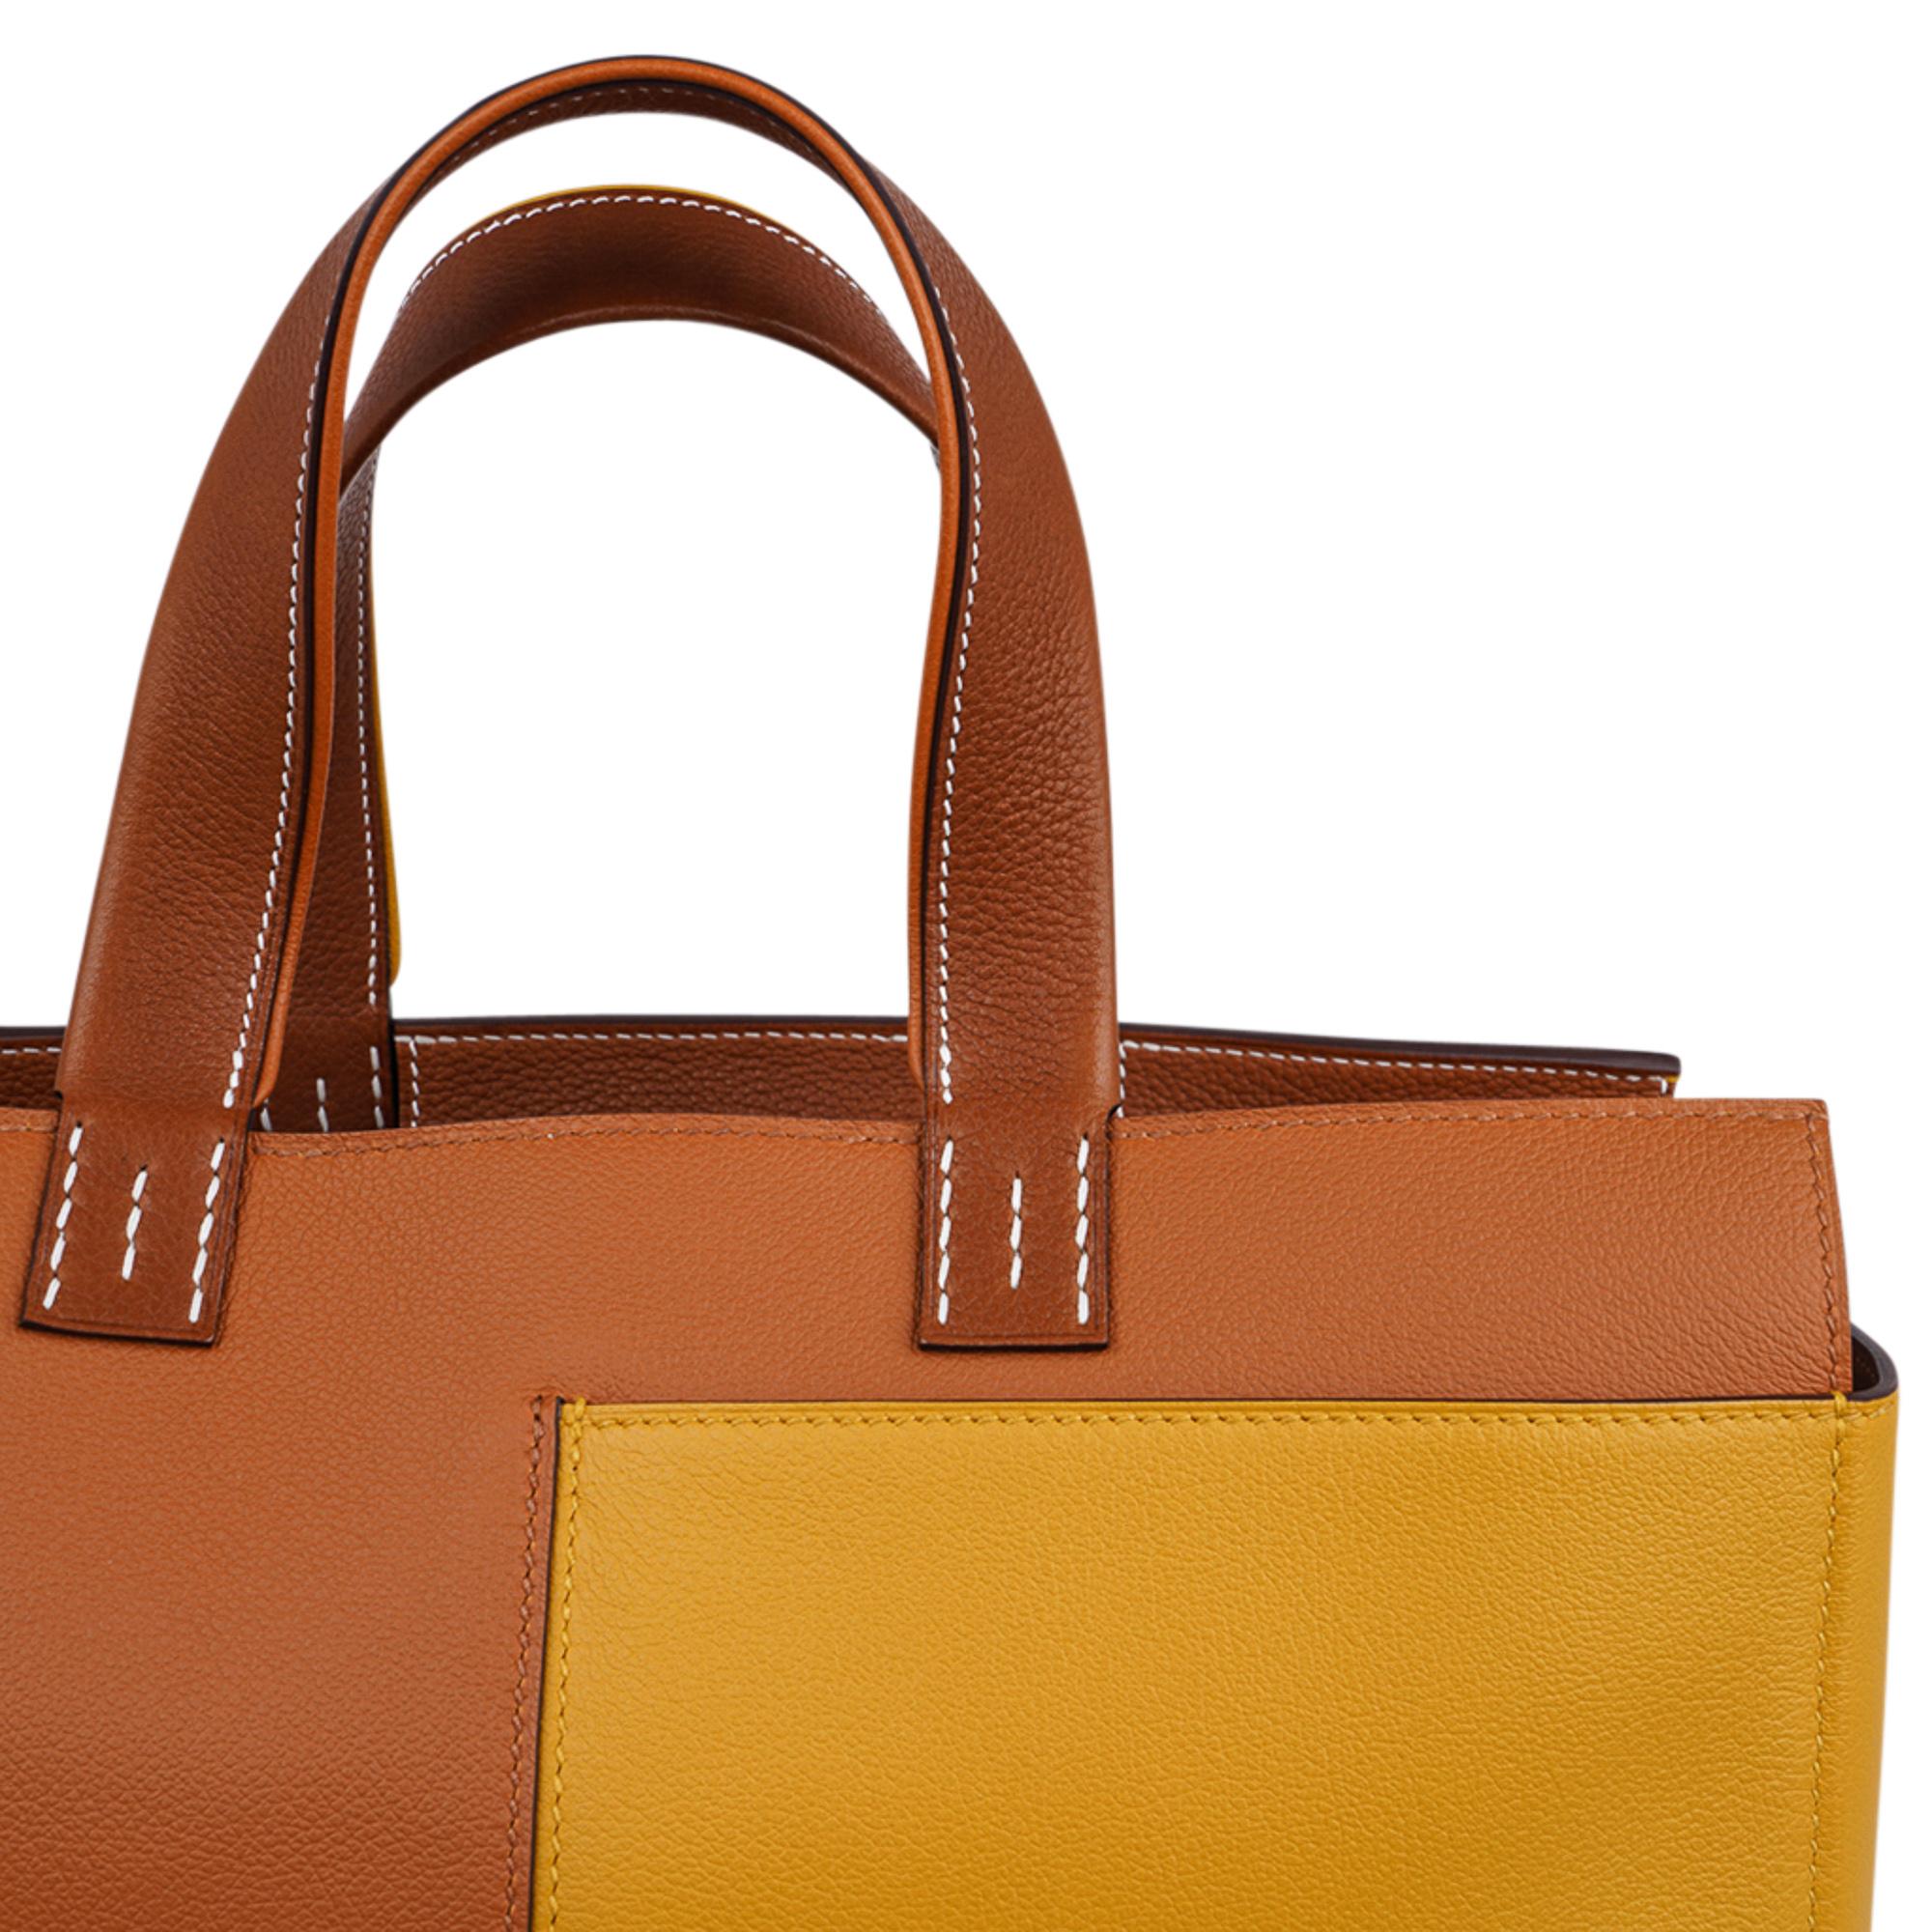 Mightychic offers a guaranteed authentic Hermes Necto 34 Tote is featured in Toffee and Jaune Ambre.
The front has two exterior slot pockets.
The Necto 34 bag comes in Evercolor leather and palladium hardware.
Two handles. one trimmed in Toffee and